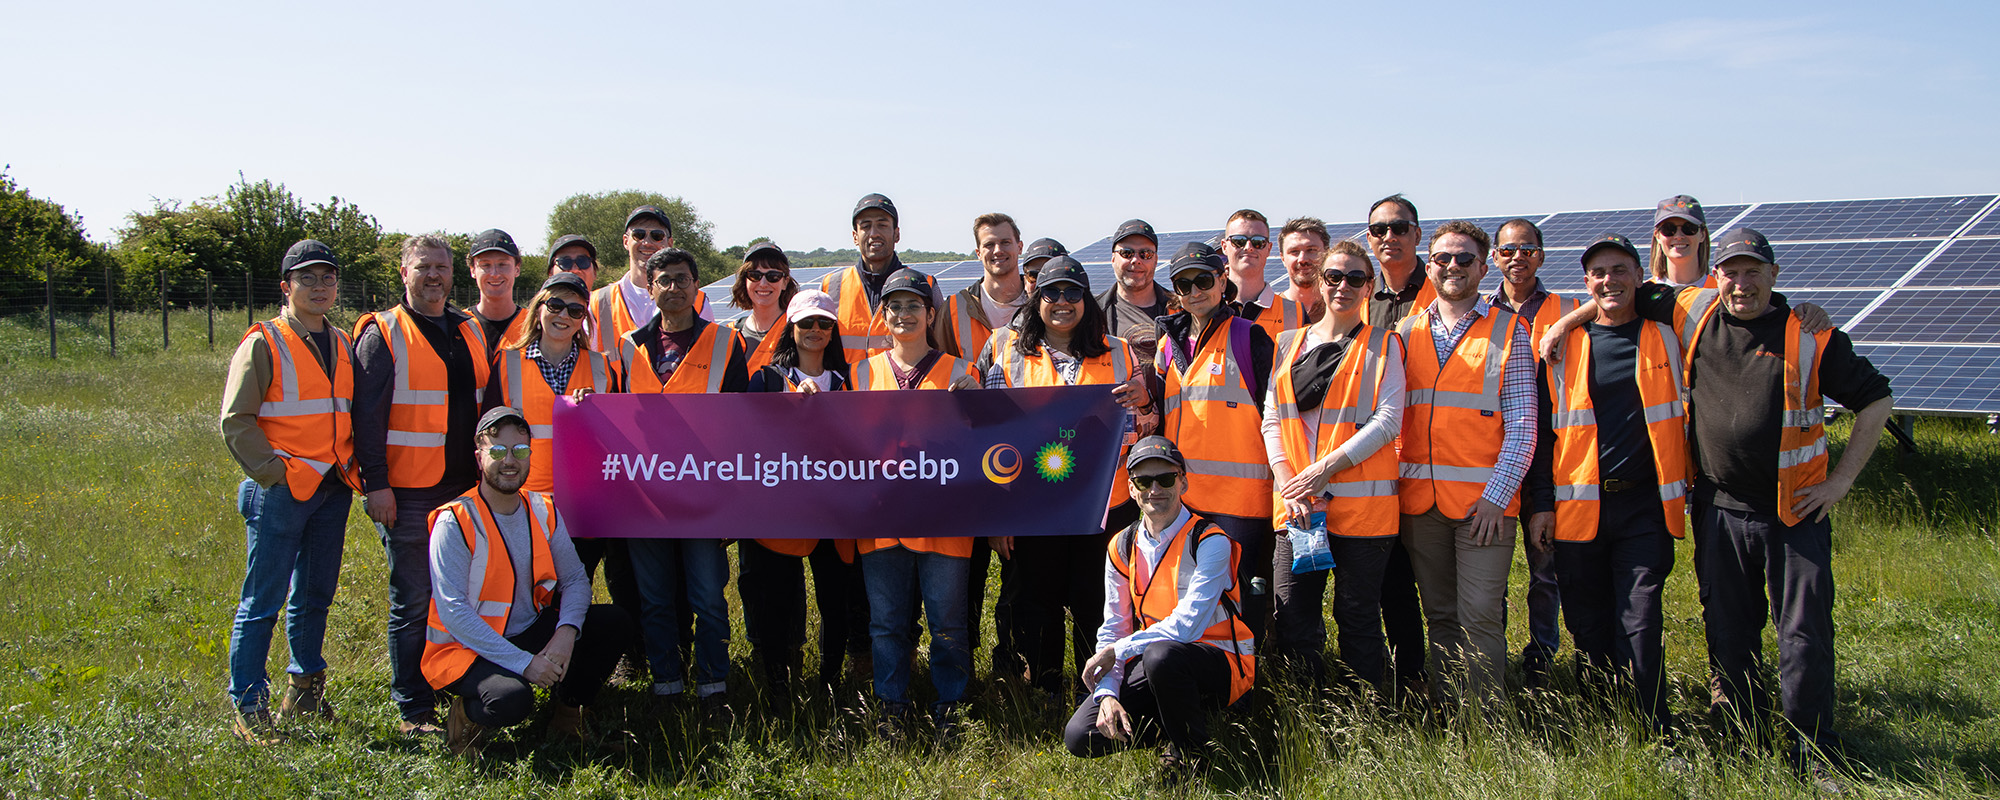 Lightsource bp team members group photo at a solar project holding a Lightsource bp banner